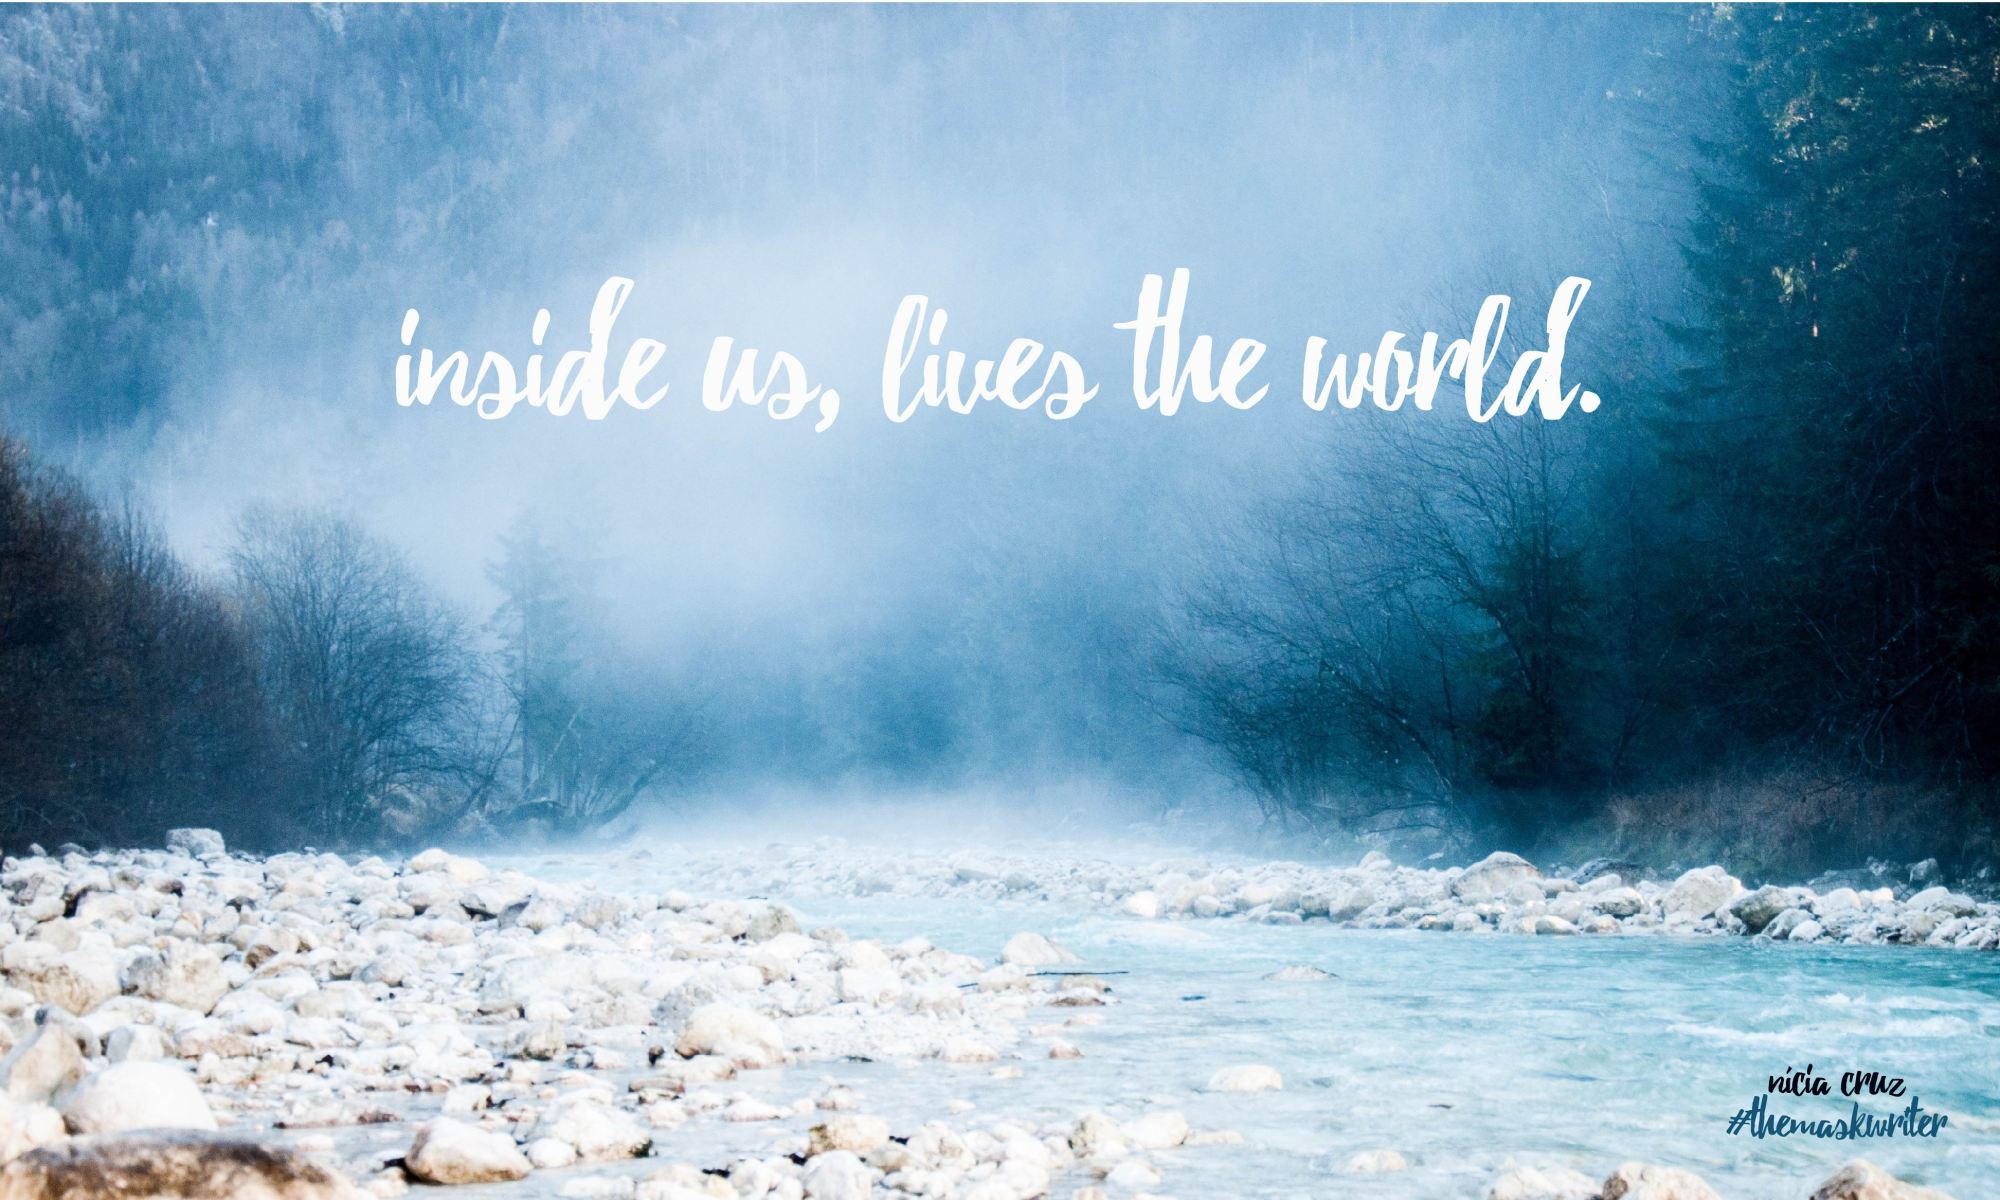 image of a blue foggy forest and some white rocks on a river. it has a quote saying: inside us, lives the world.